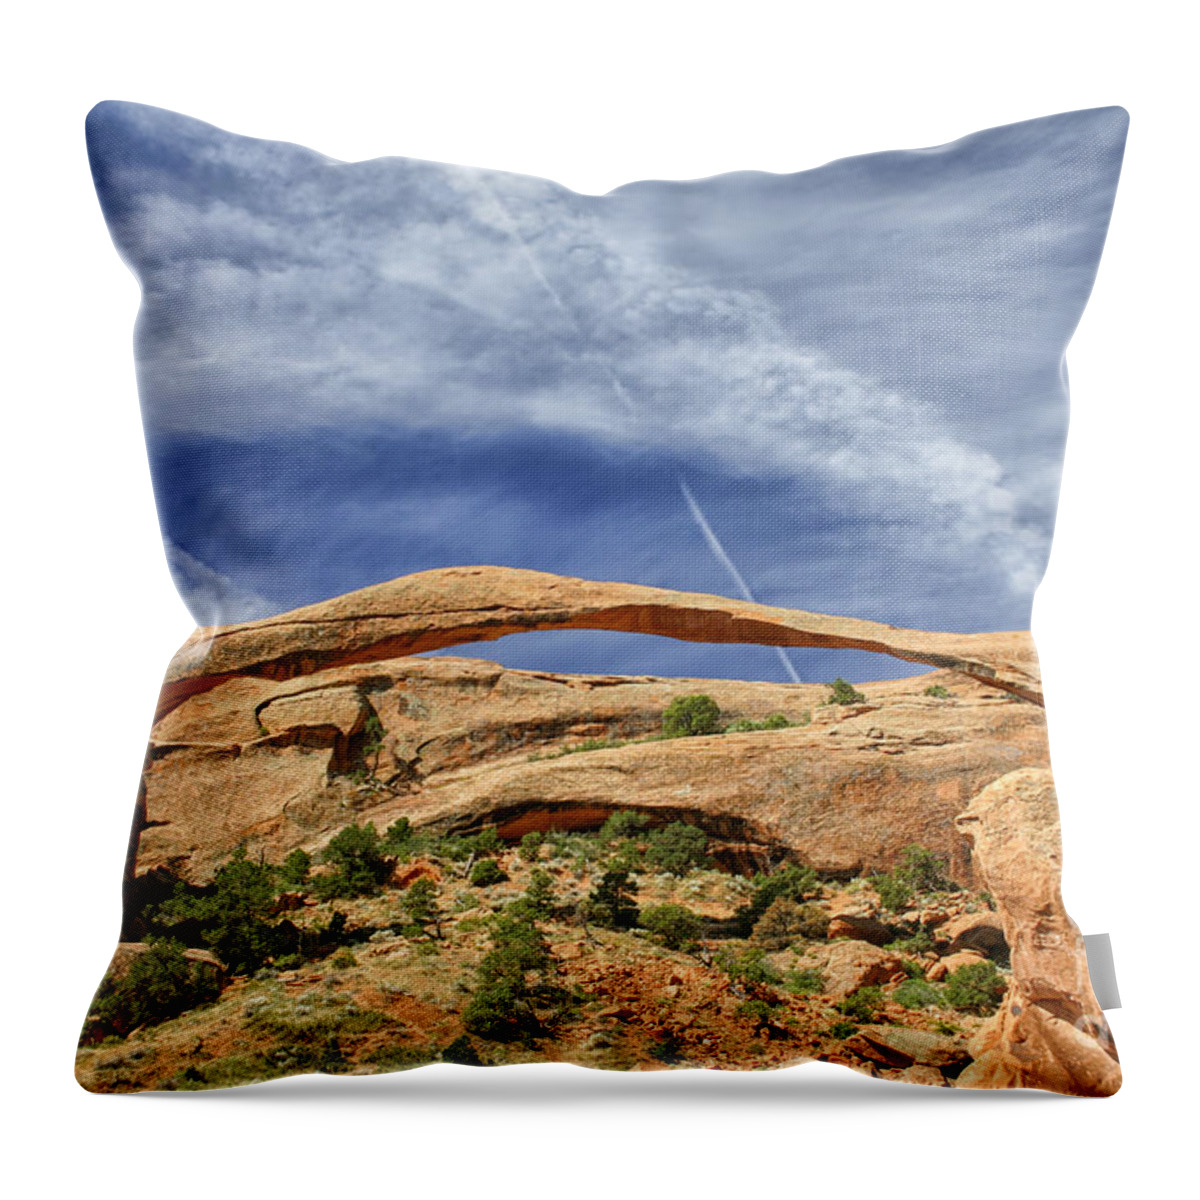 America Throw Pillow featuring the photograph Arched by Patricia Hofmeester